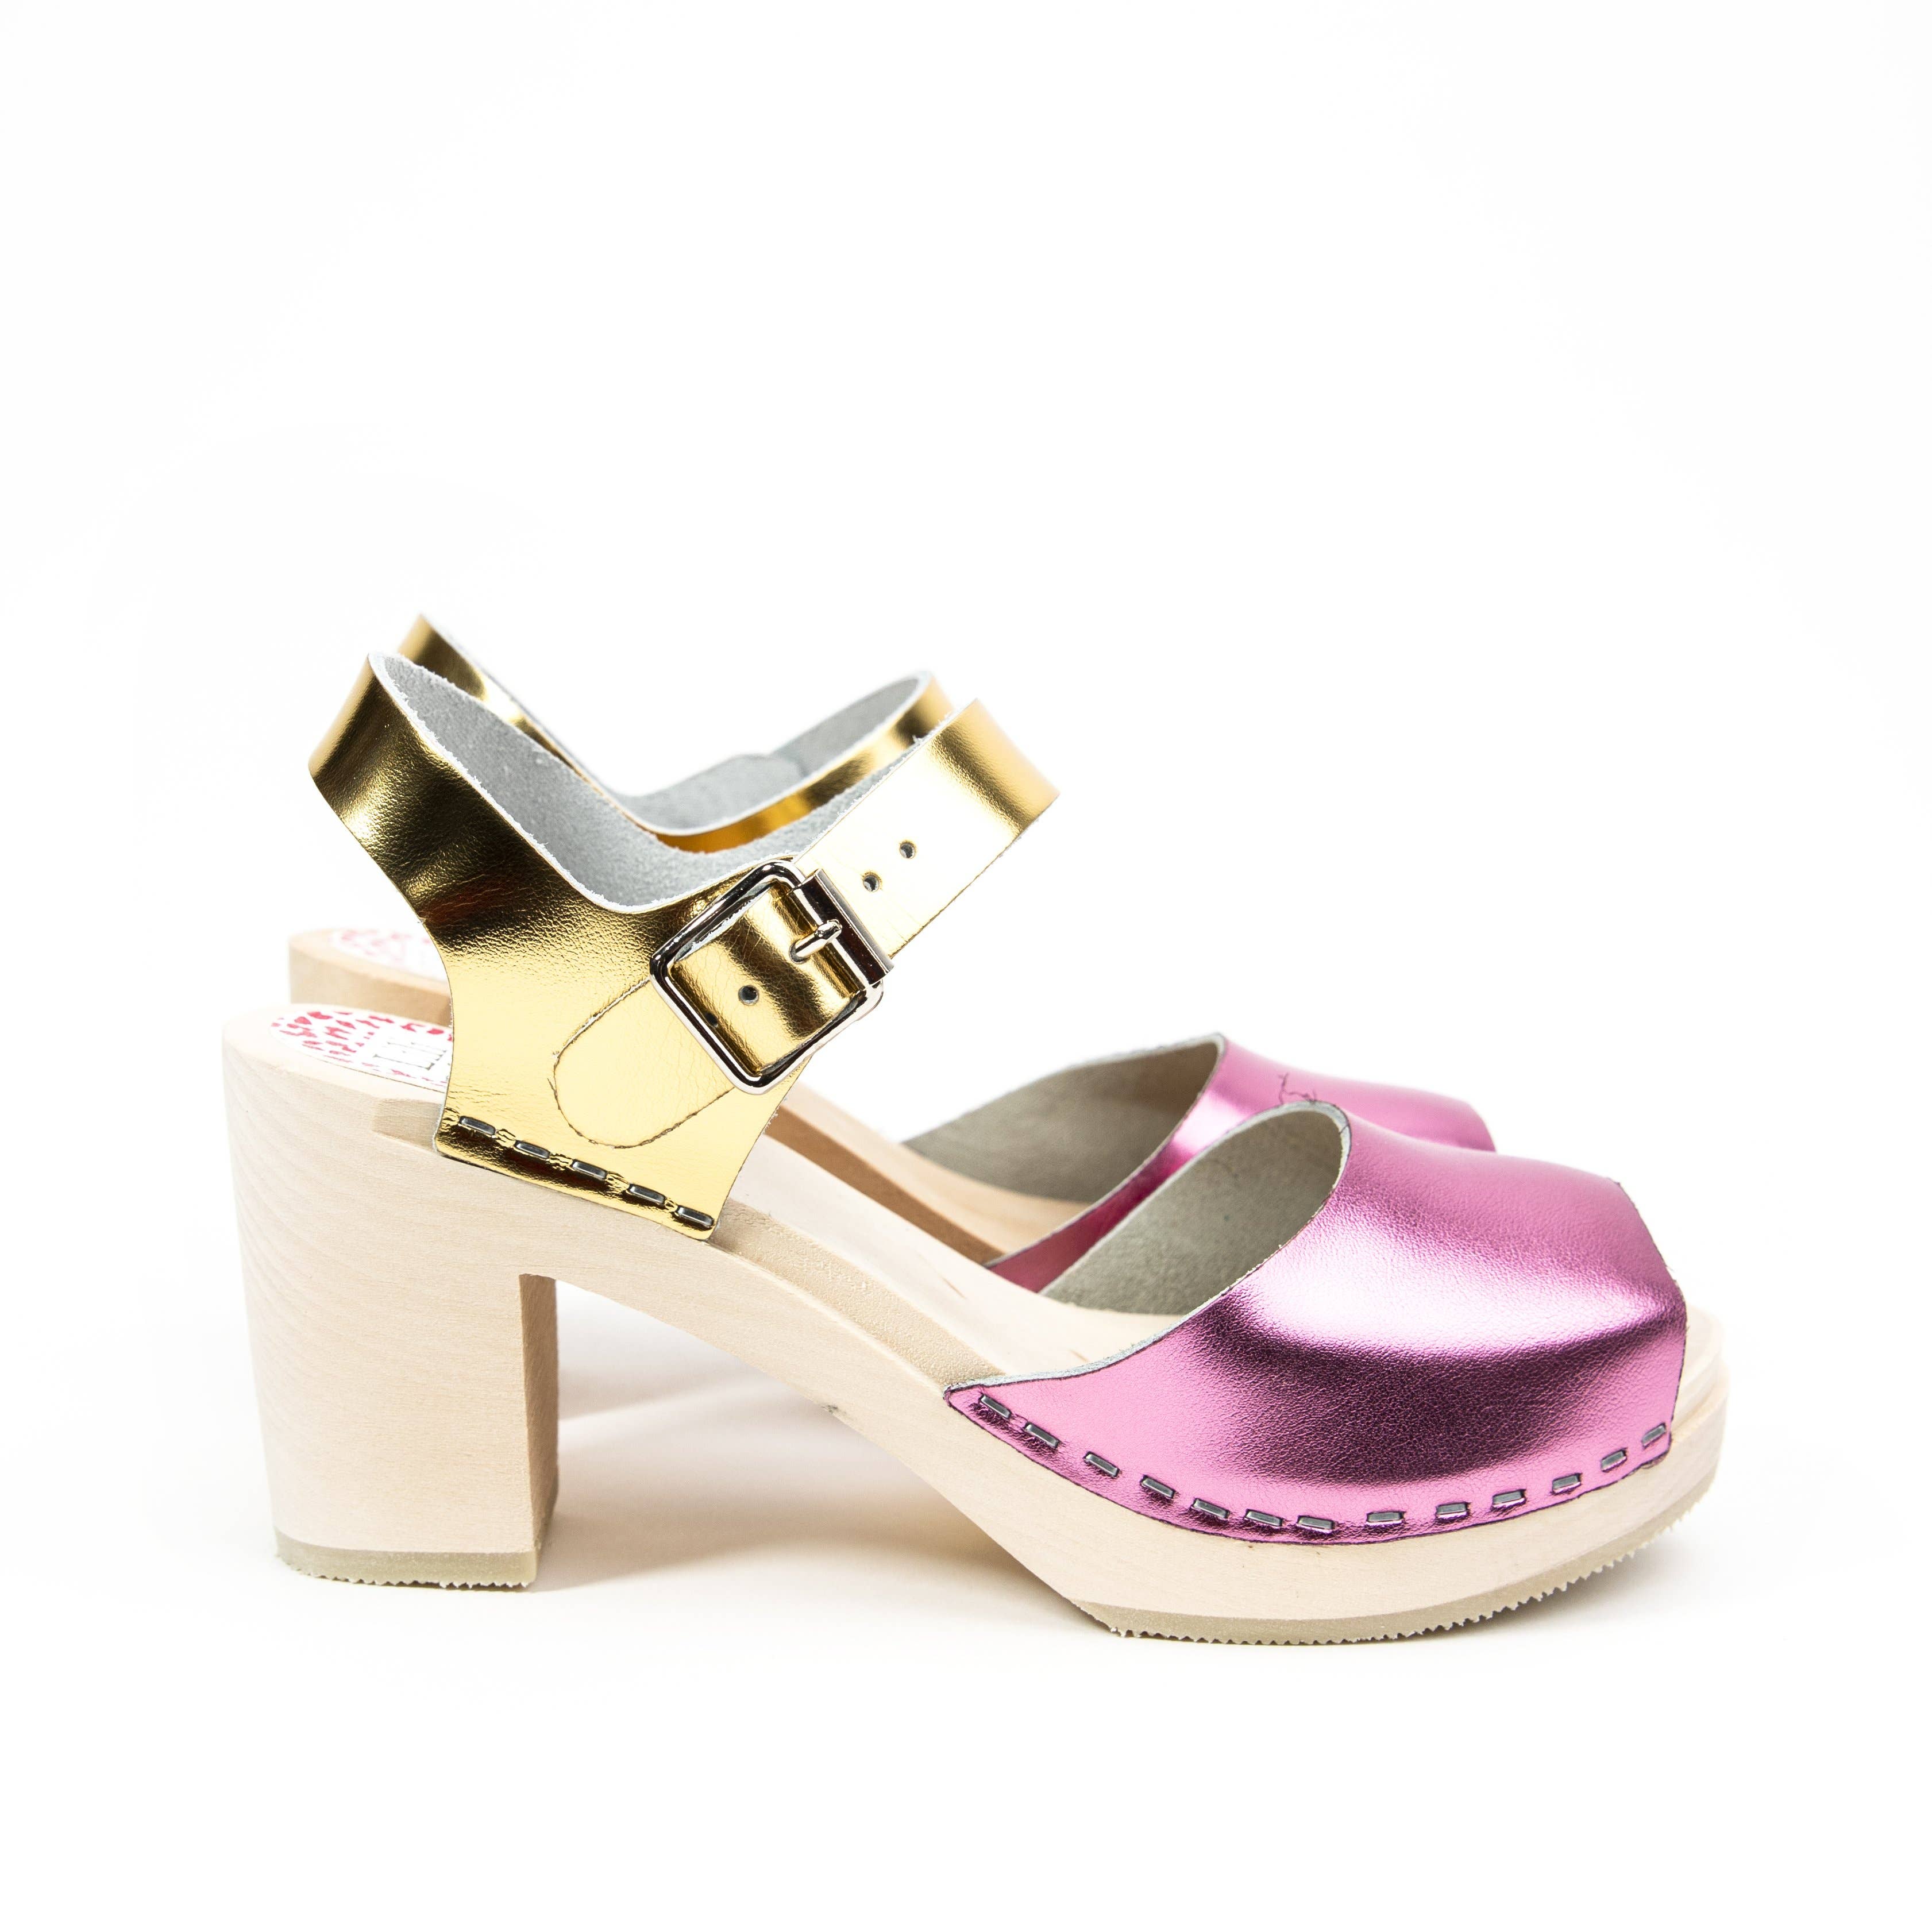 Visby Sandal Clog | Pink and Gold